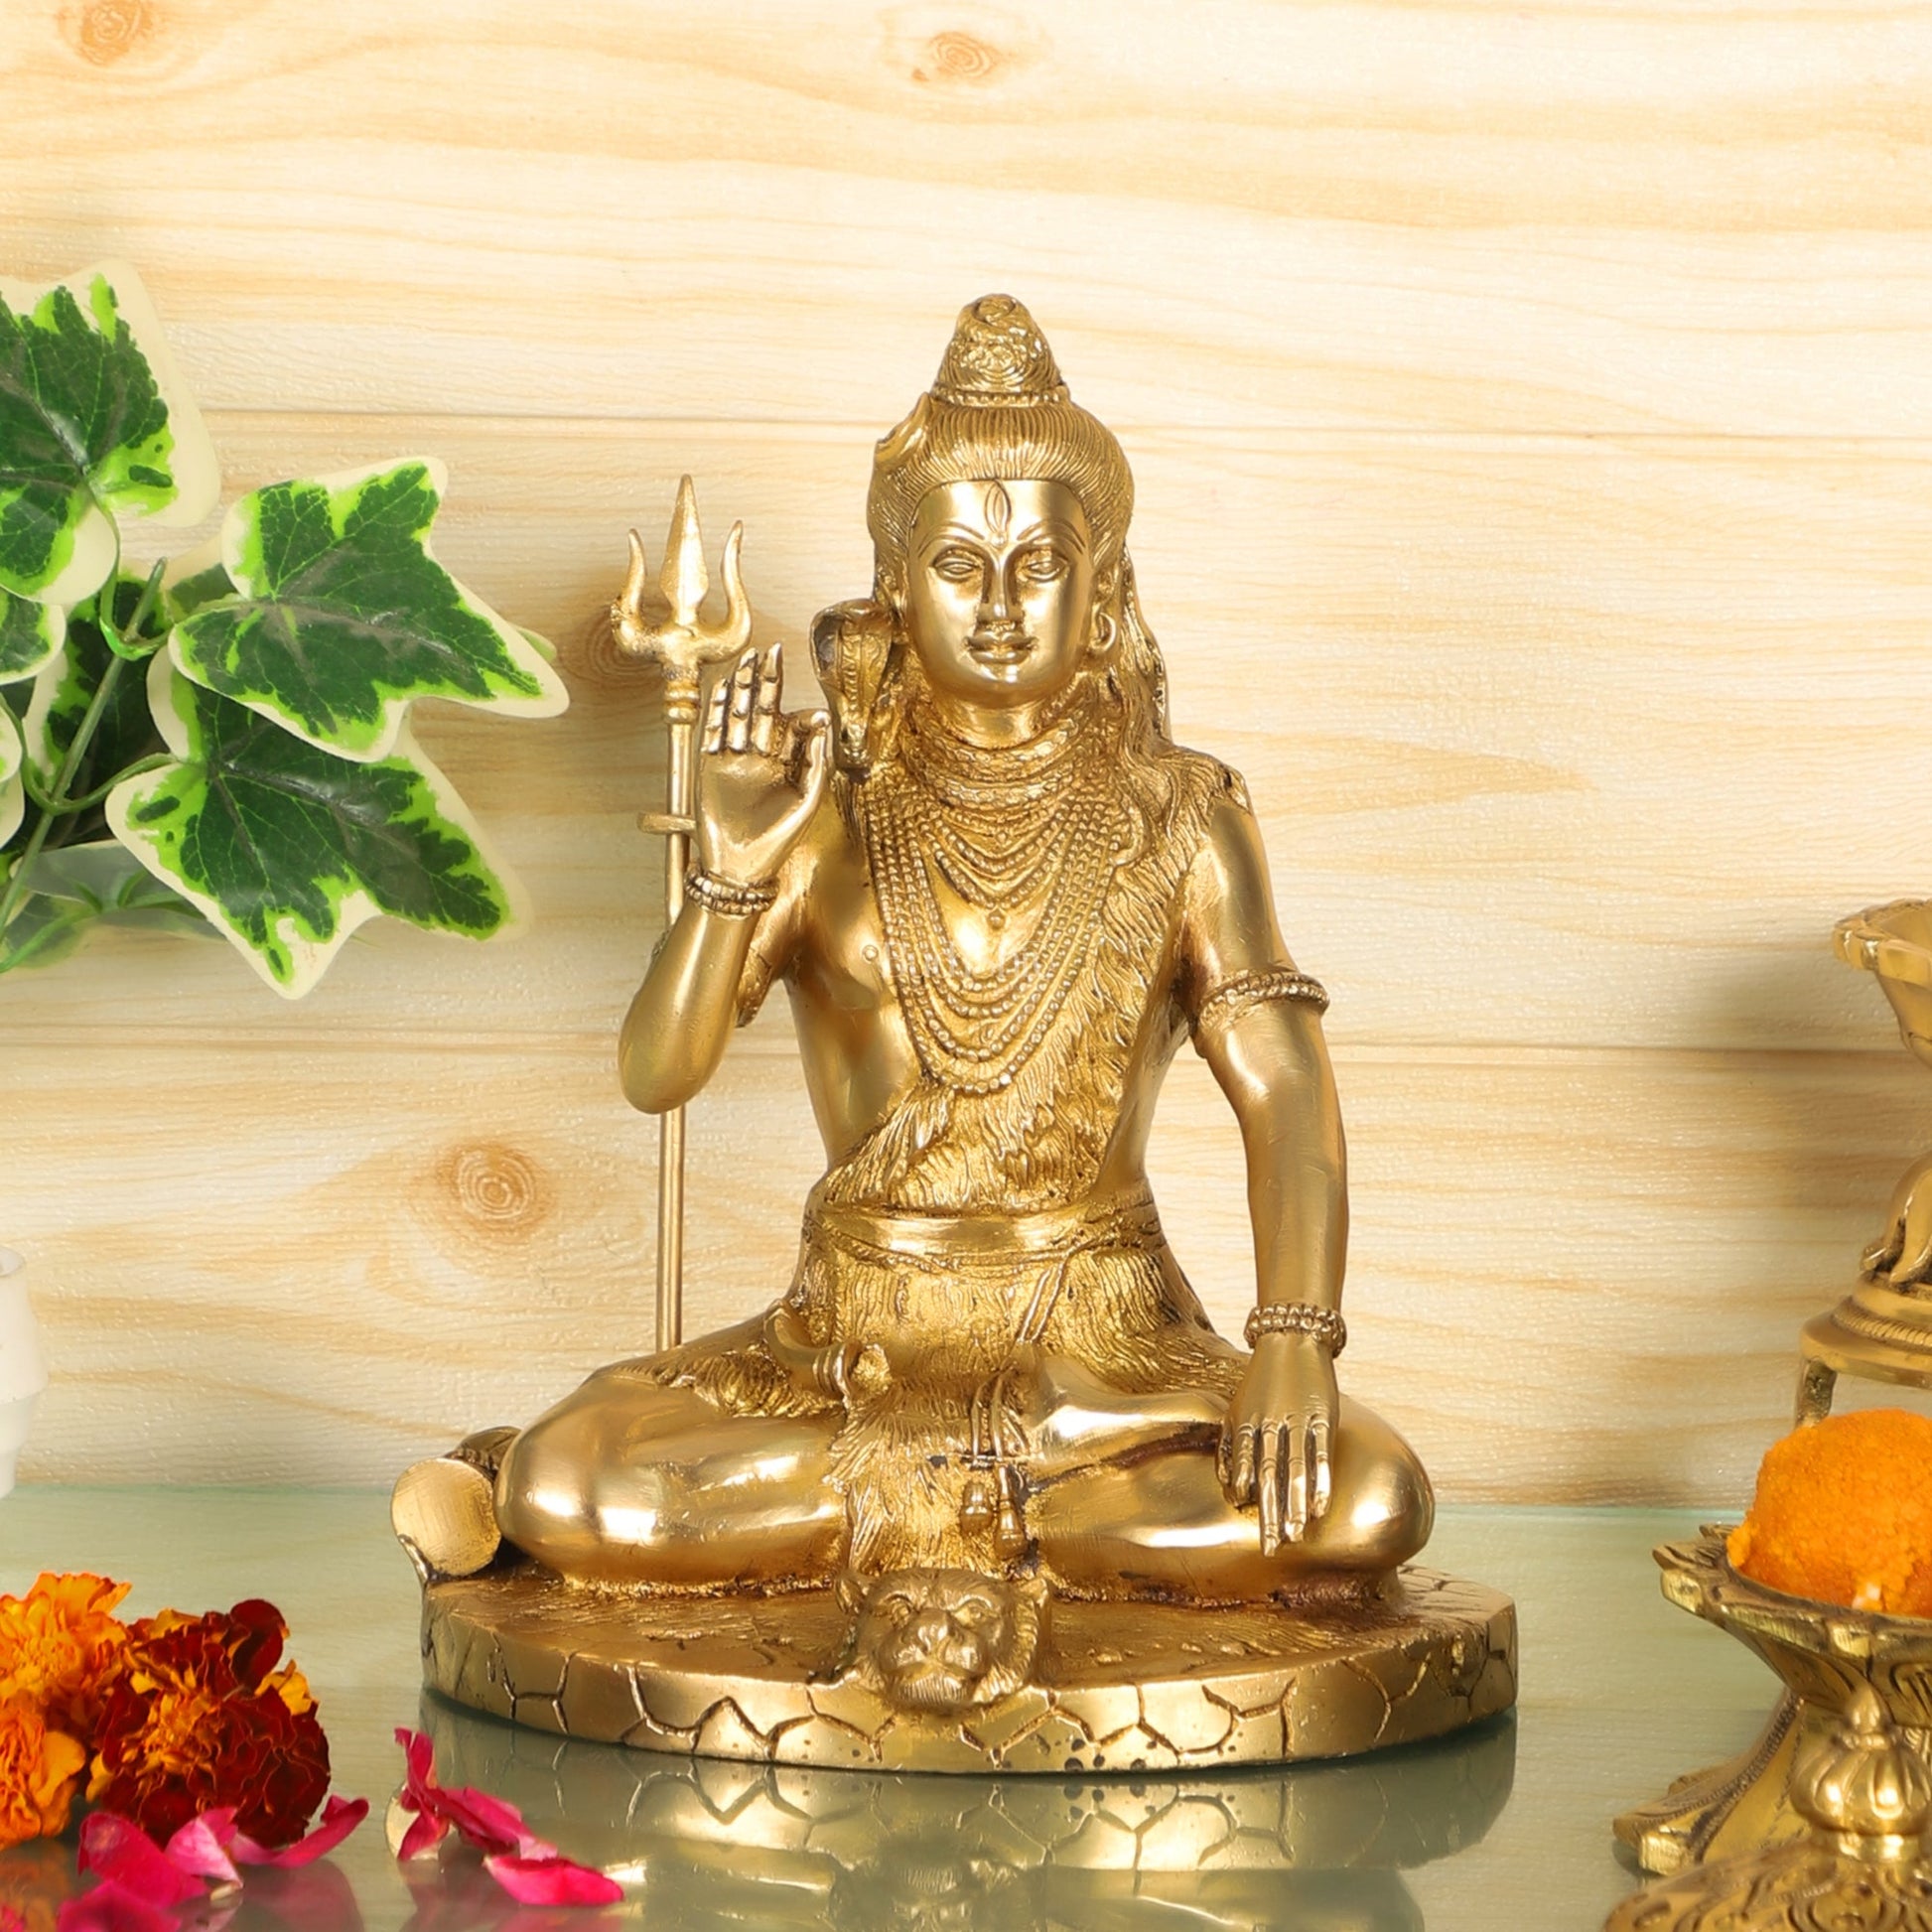 Brass Handcrafted Lord Shiva Statue | Finely Crafted with Sharp Detailing | 9.5" Height" - Budhshiv.com